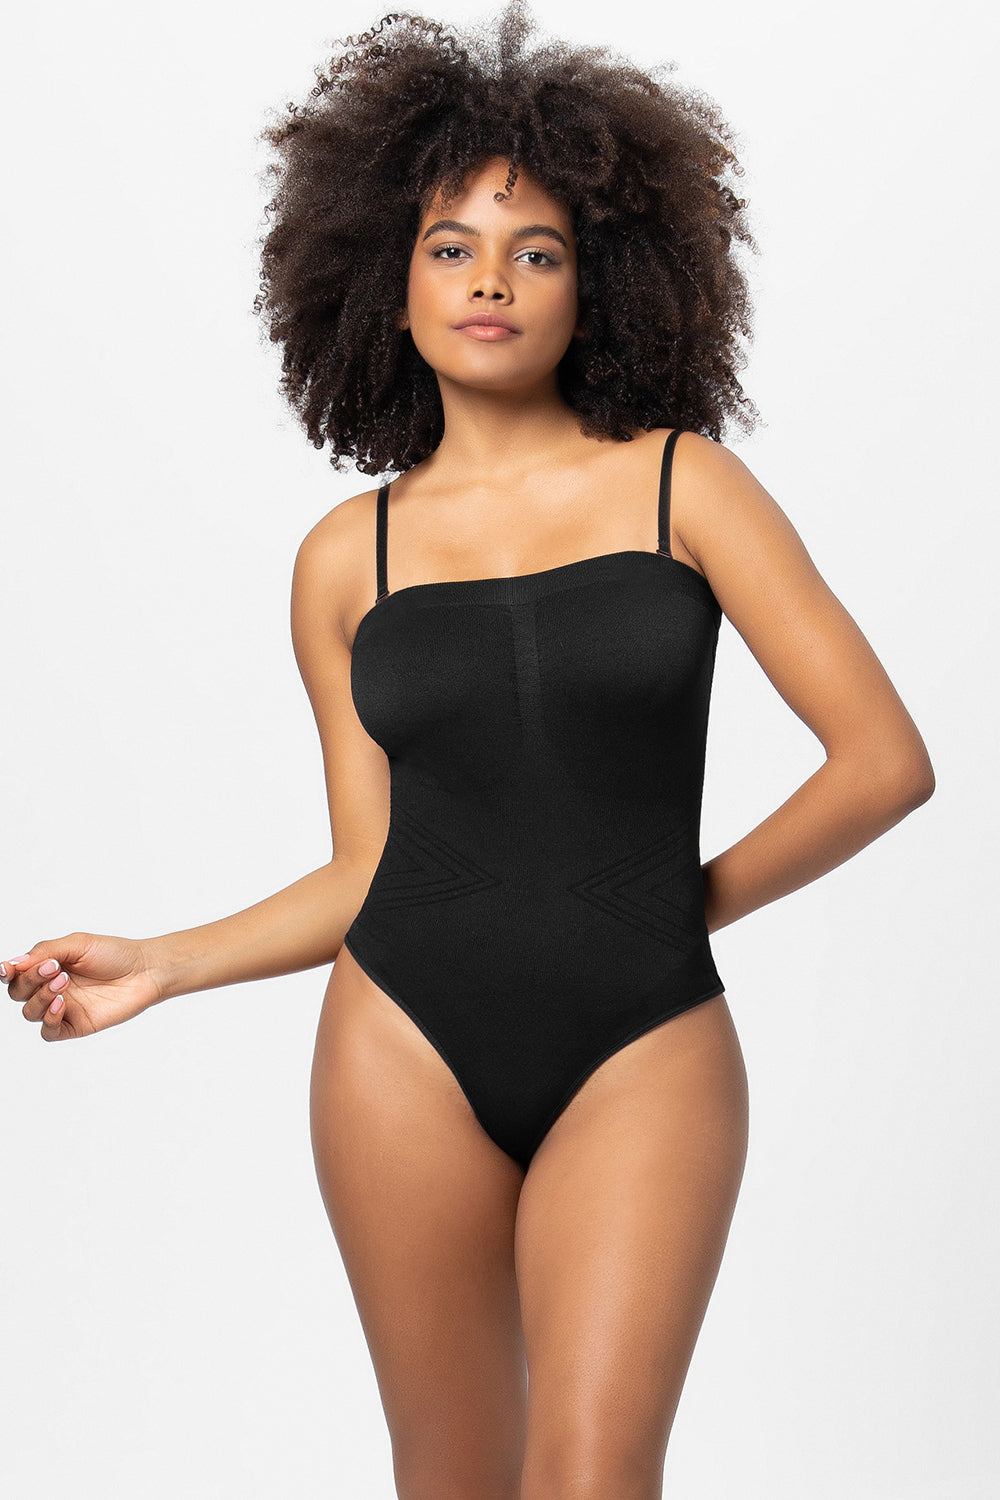 Bodysuit Women with Removable Straps Sexy Shapewear Tummy Control